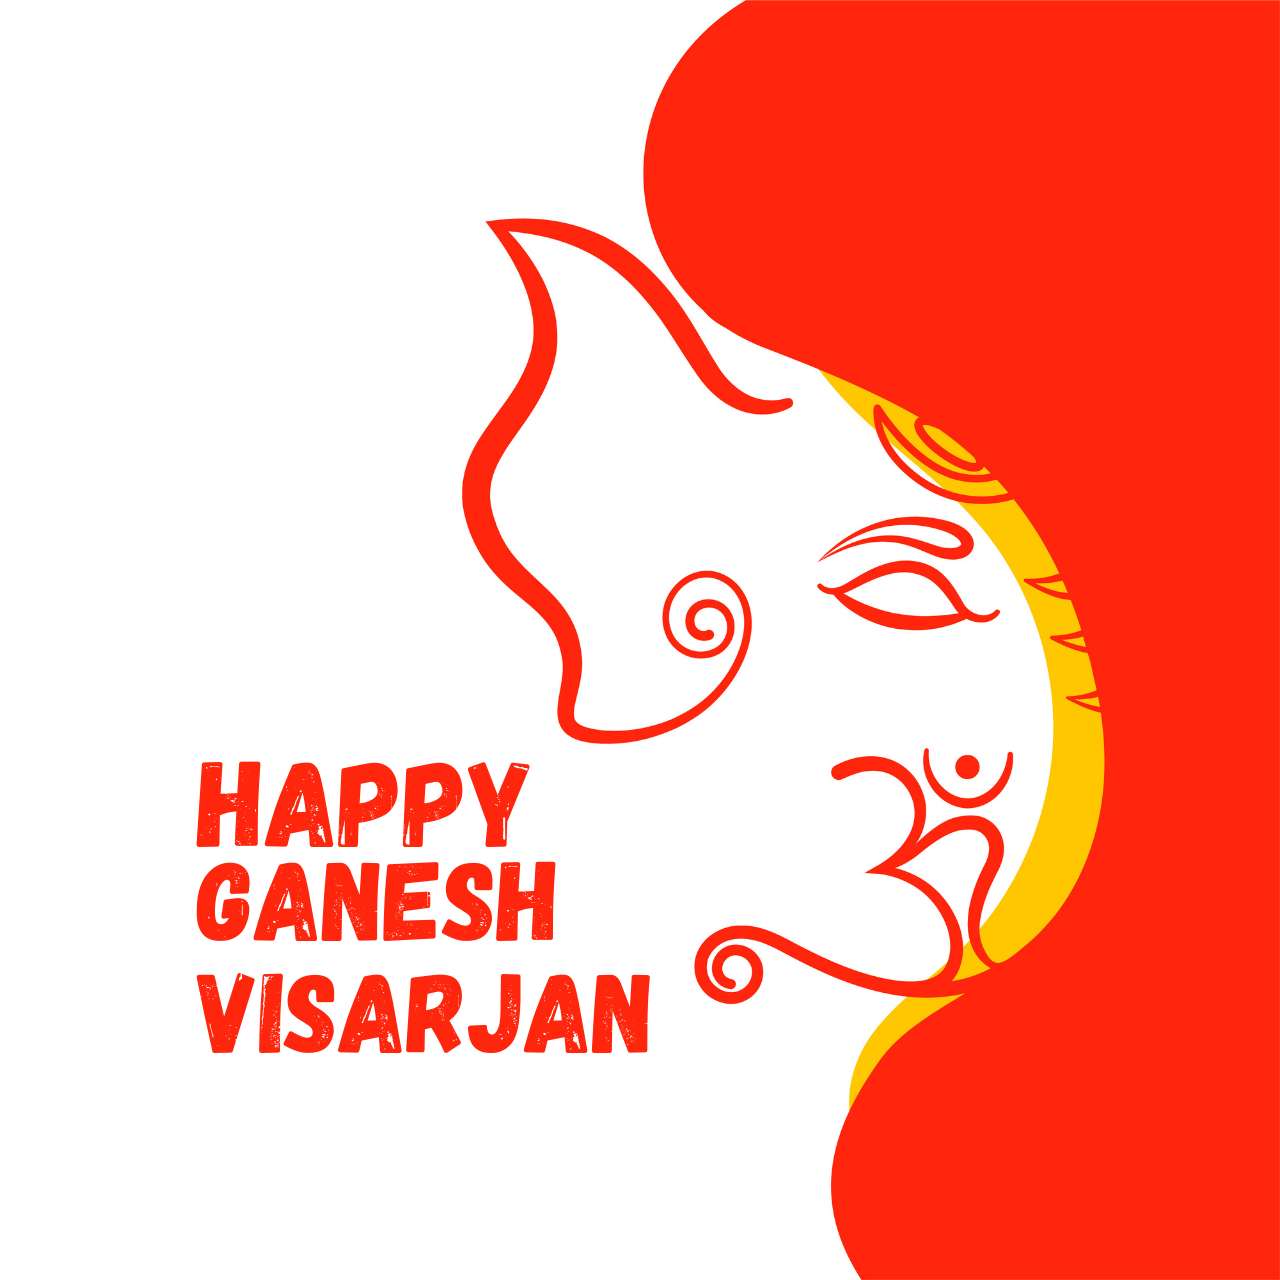 Happy Ganesh Visarjan 2021 Marathi Wishes, Quotes, Shayari, Messages, Images and WhatsApp Status Video to Download